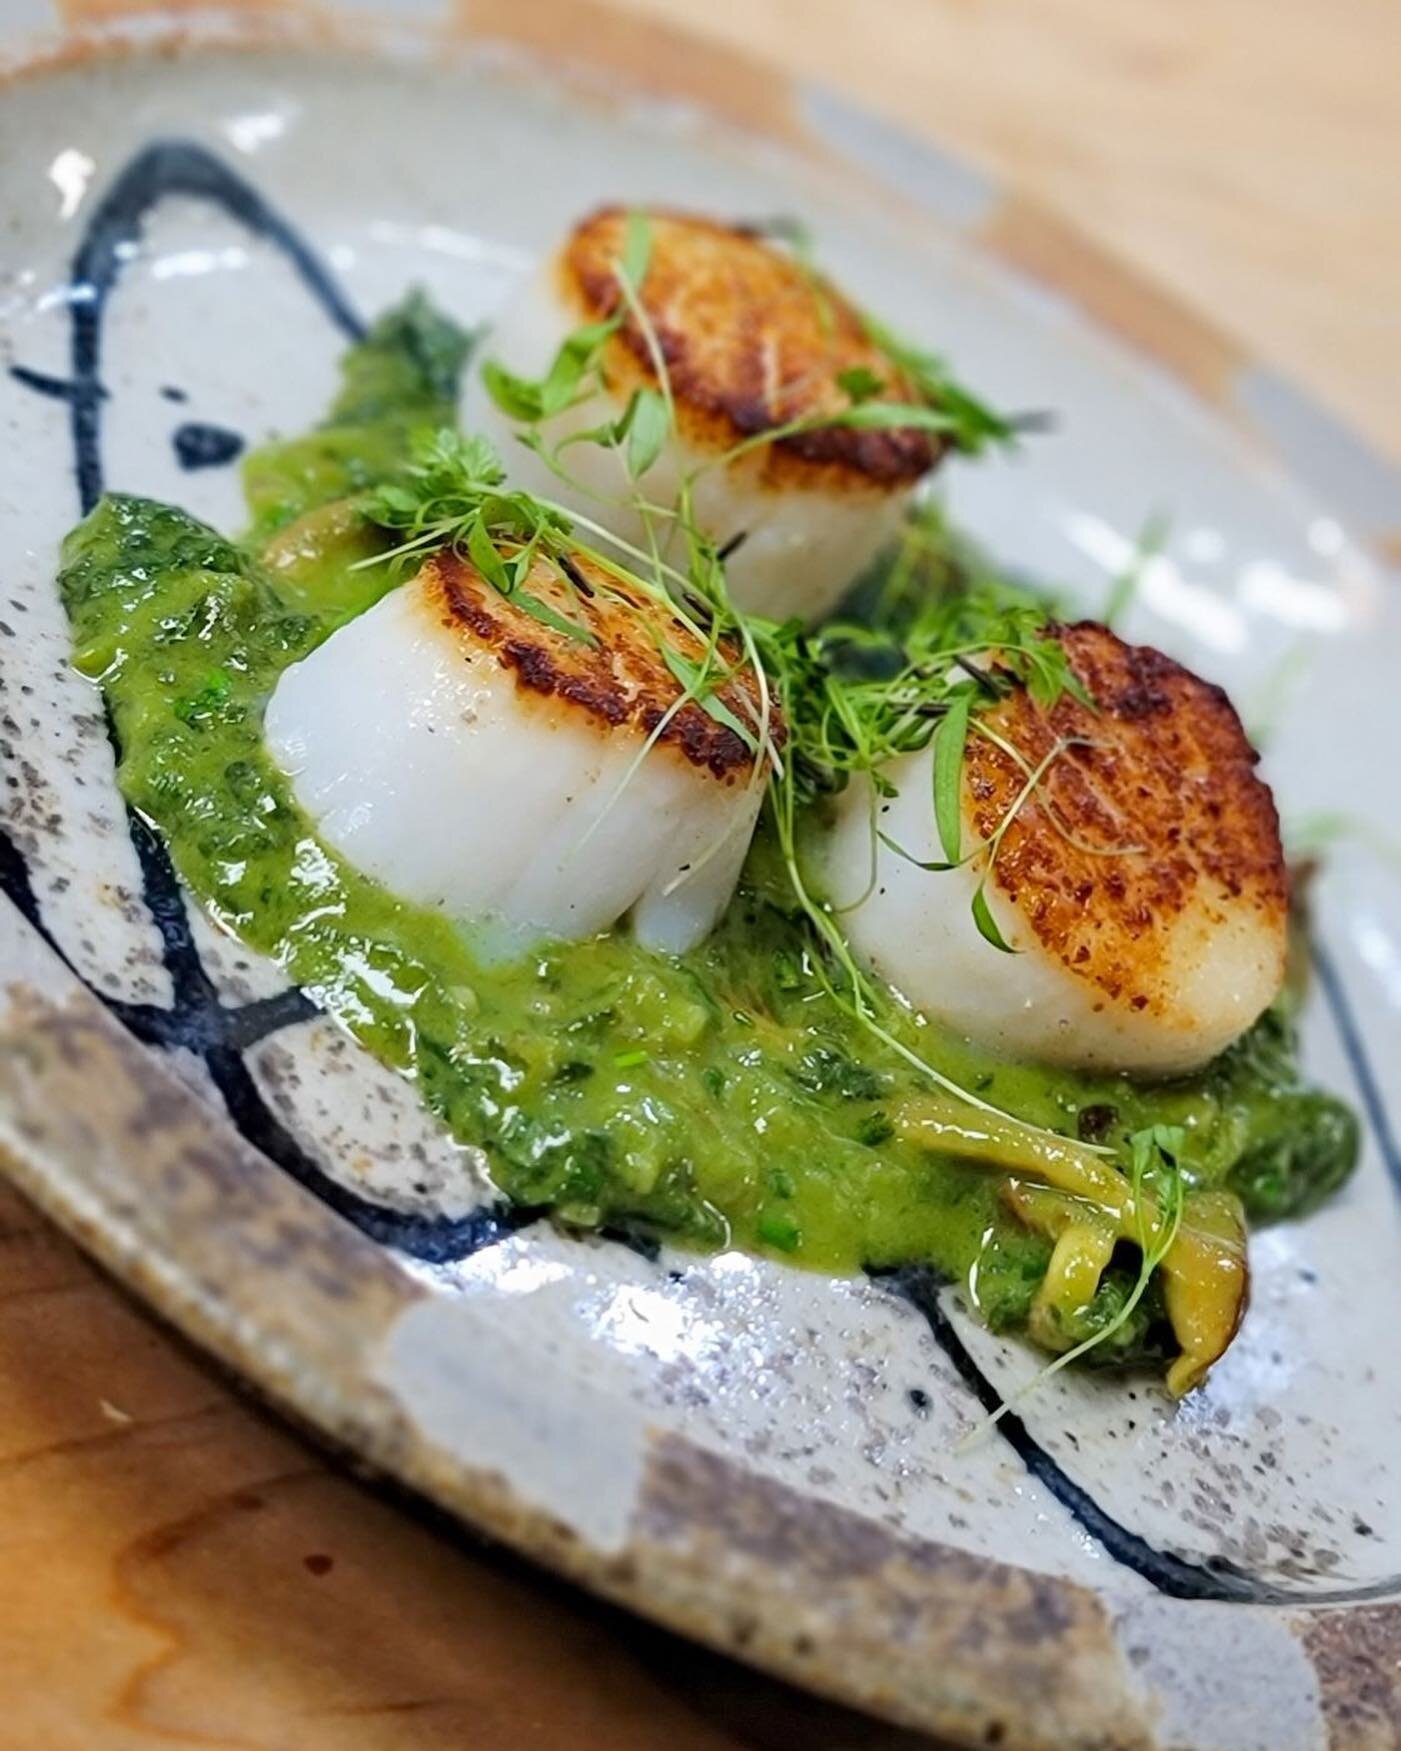 Our scallops are getting a new upgrade this weekend! 

&quot;Creamed&quot; greens, chestnut mushrooms from @Chesapeakefungi, foraged stinging nettles from @chefinitup. 

Here today, gone tomorrow; better come get it soon!

Hit the Reserve button!